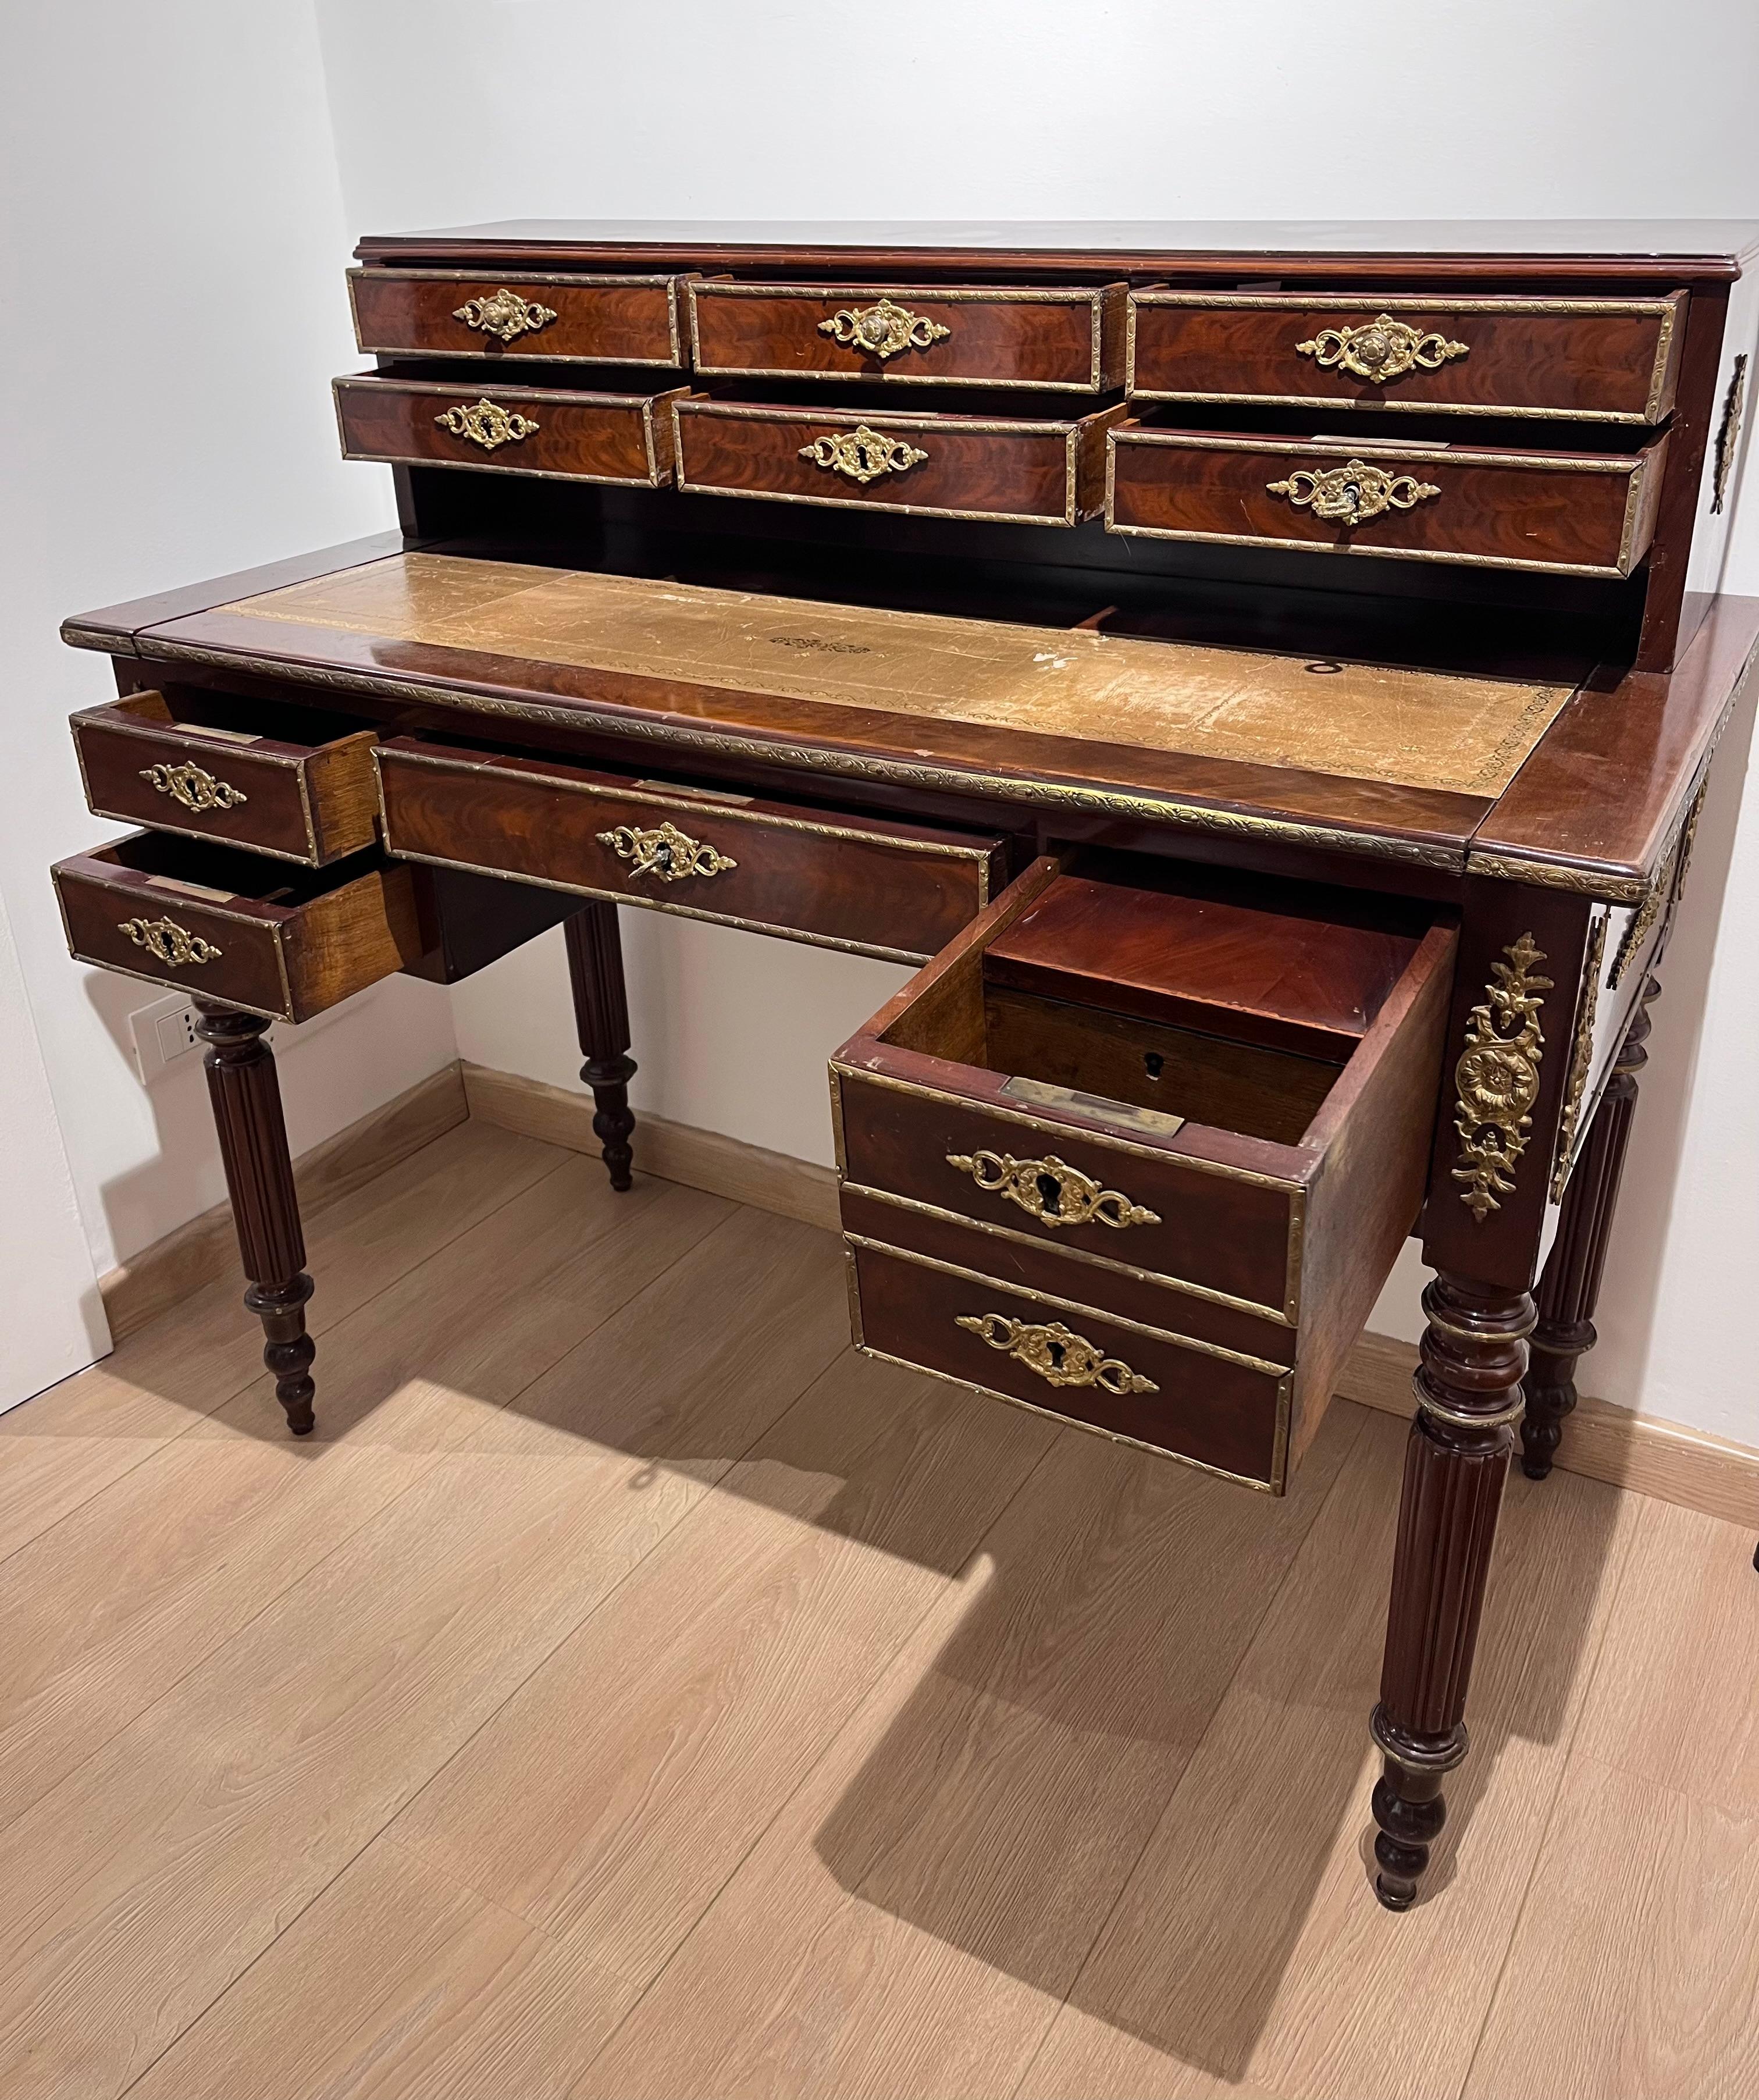 Mahogany Centrepiece Desk with Drawers France 19th Century In Good Condition For Sale In Palermo, IT